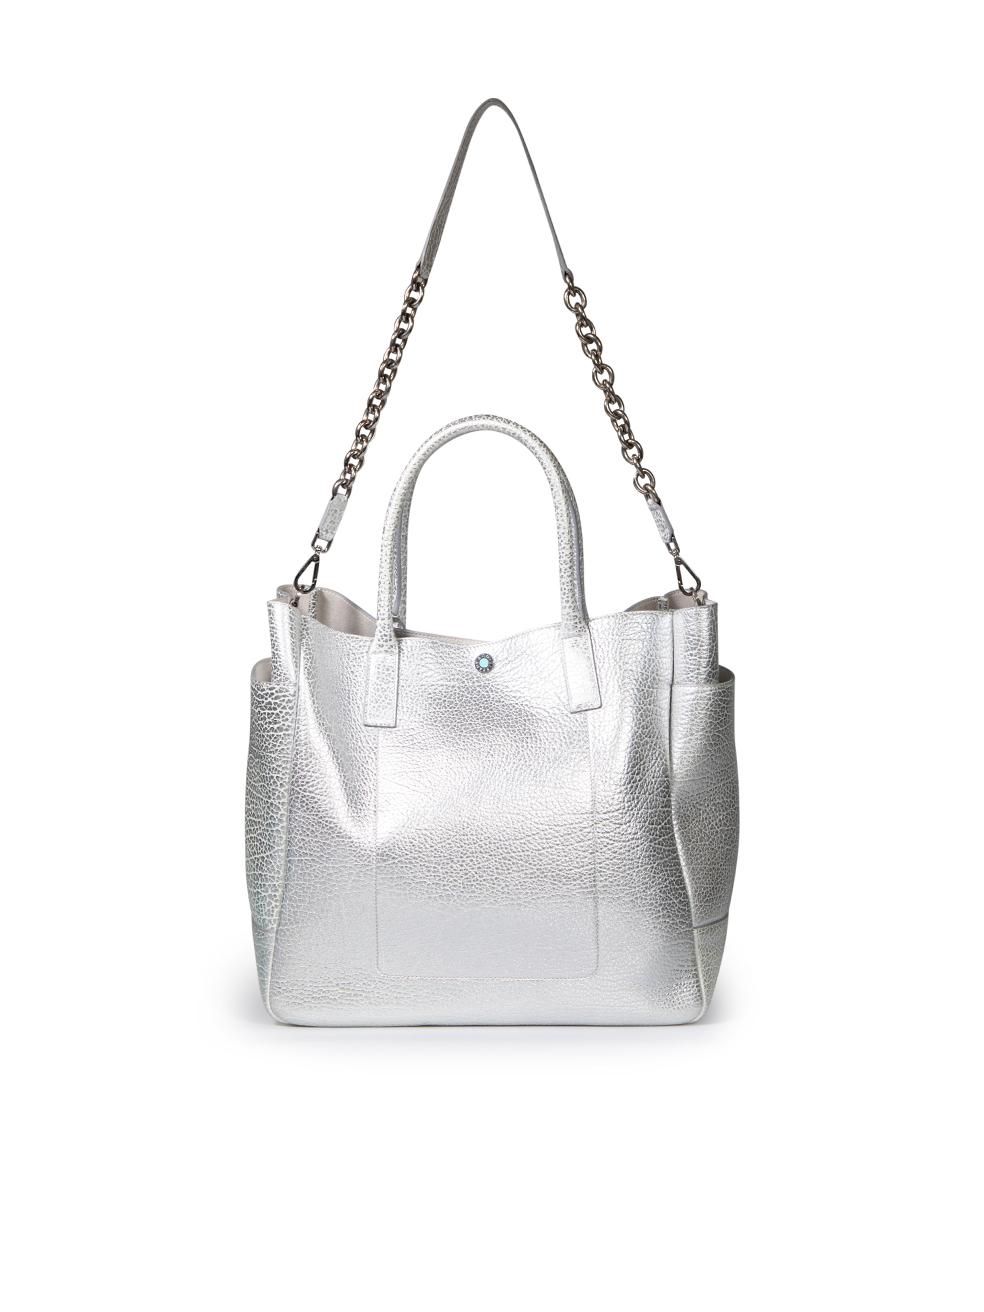 Tiffany & Co. Silver Leather Tote Bag im Zustand „Gut“ in London, GB